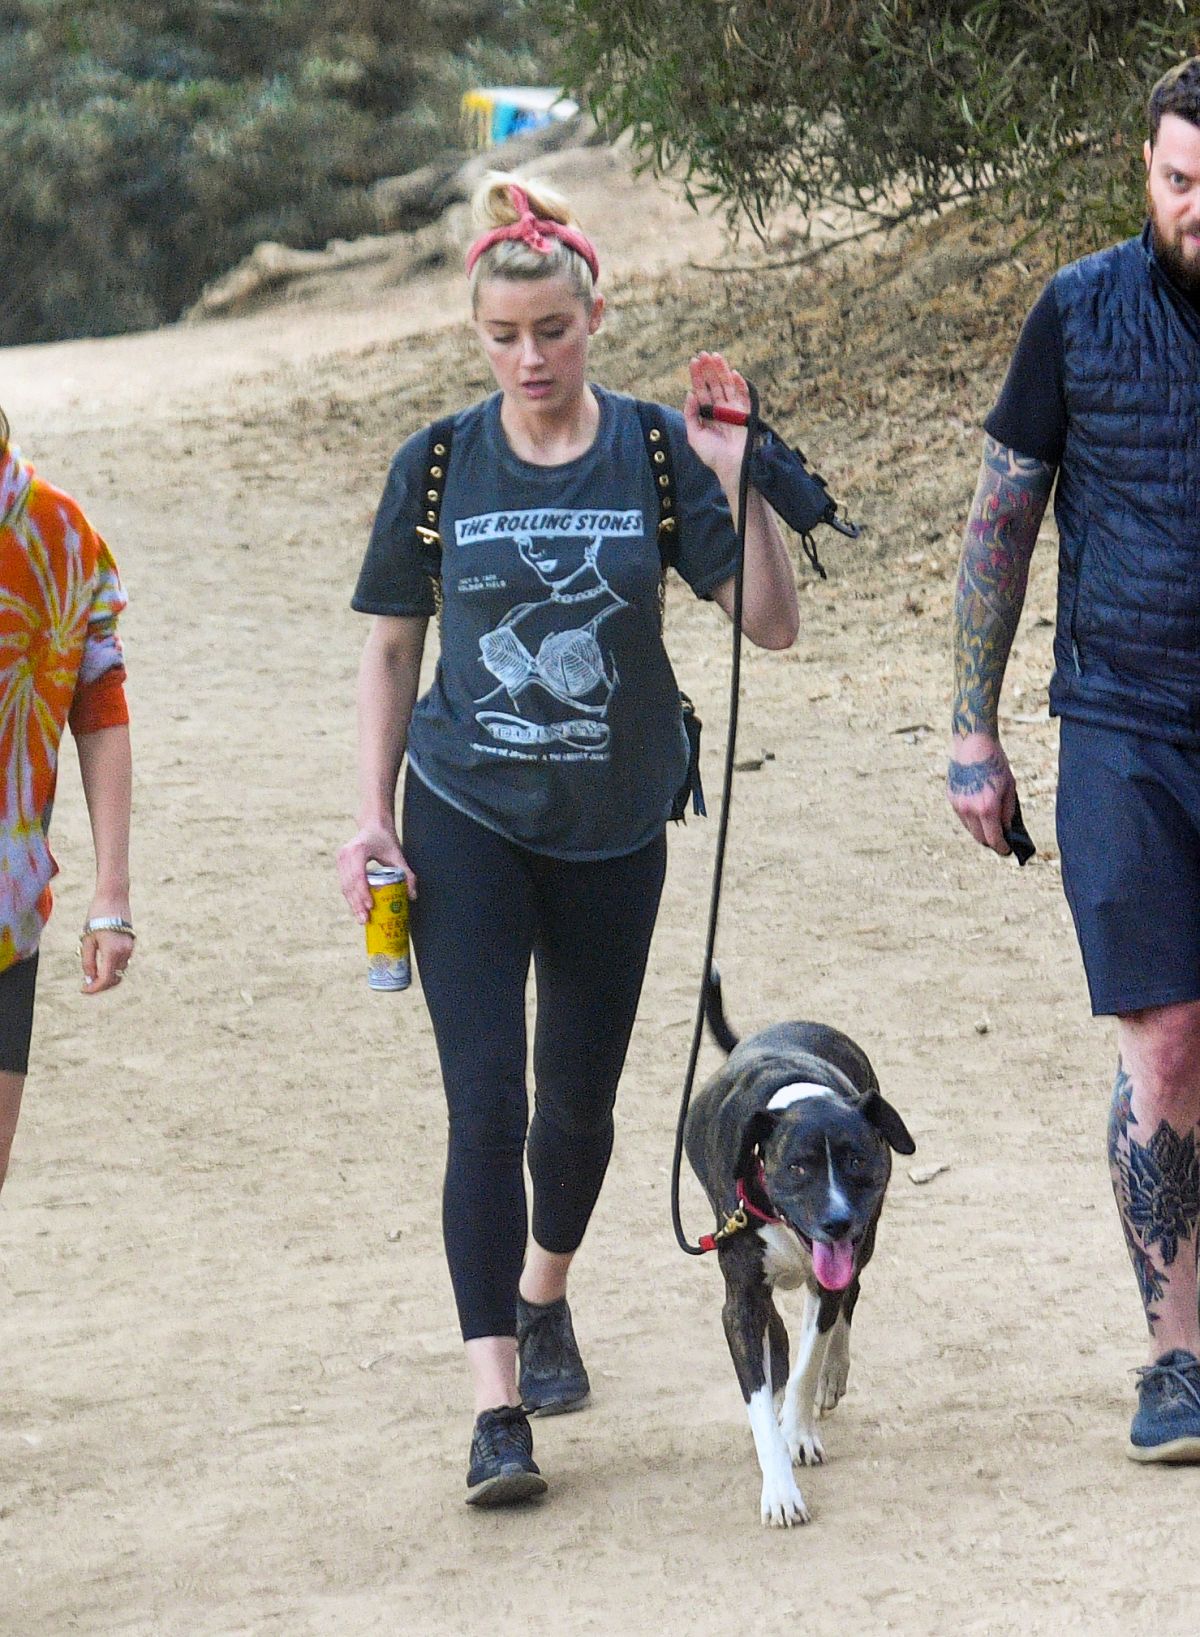 amber-heard-out-hiking-with-her-dog-in-los-angeles-10-31-2020-2.jpg